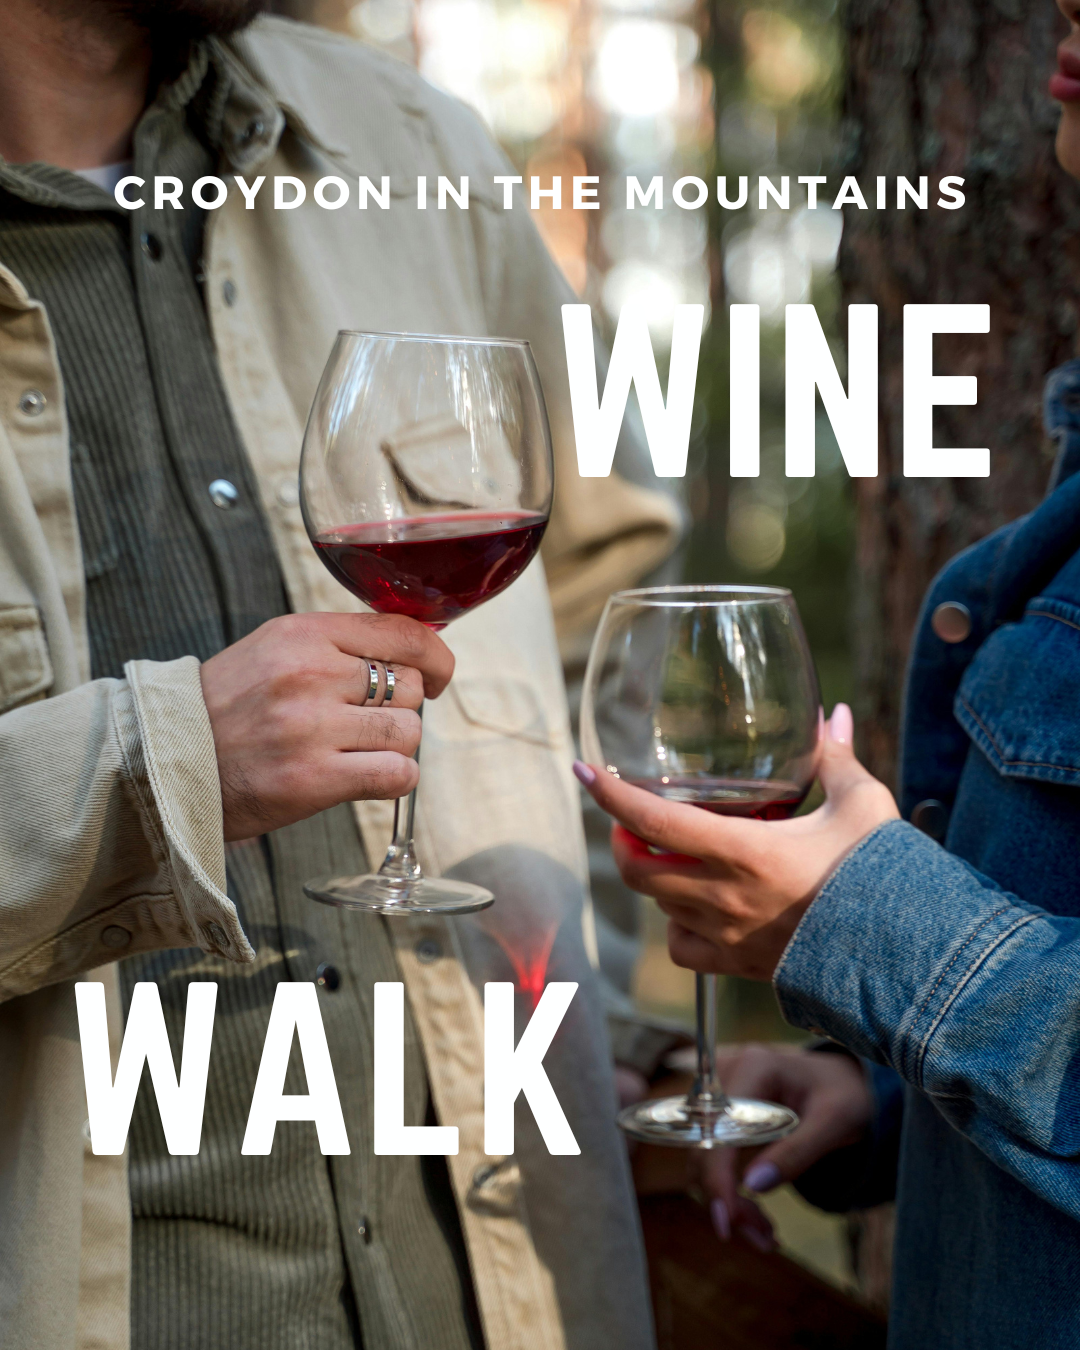 Croydon in the mountains wine walk poster with two people holding wine glasses